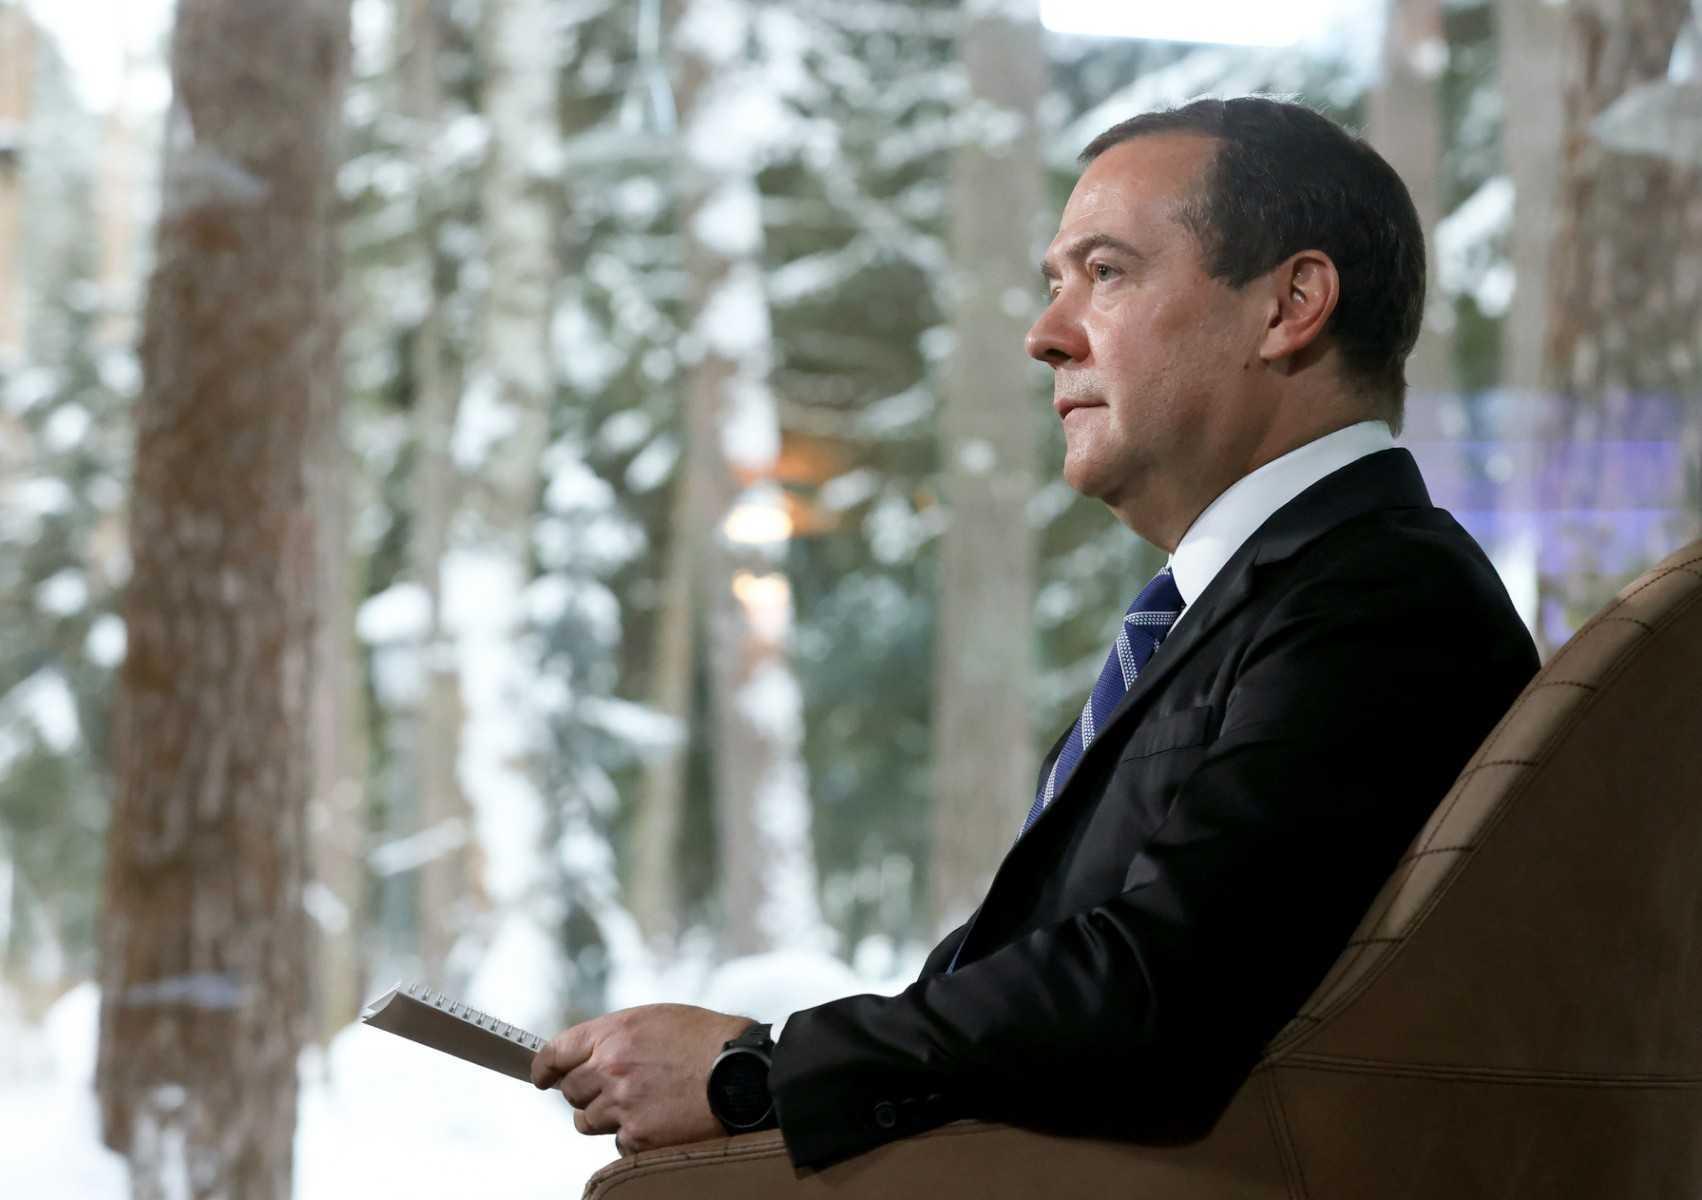 United Russia Party chairman and deputy chairman of the Russian Security Council Dmitry Medvedev. Photo: AFP